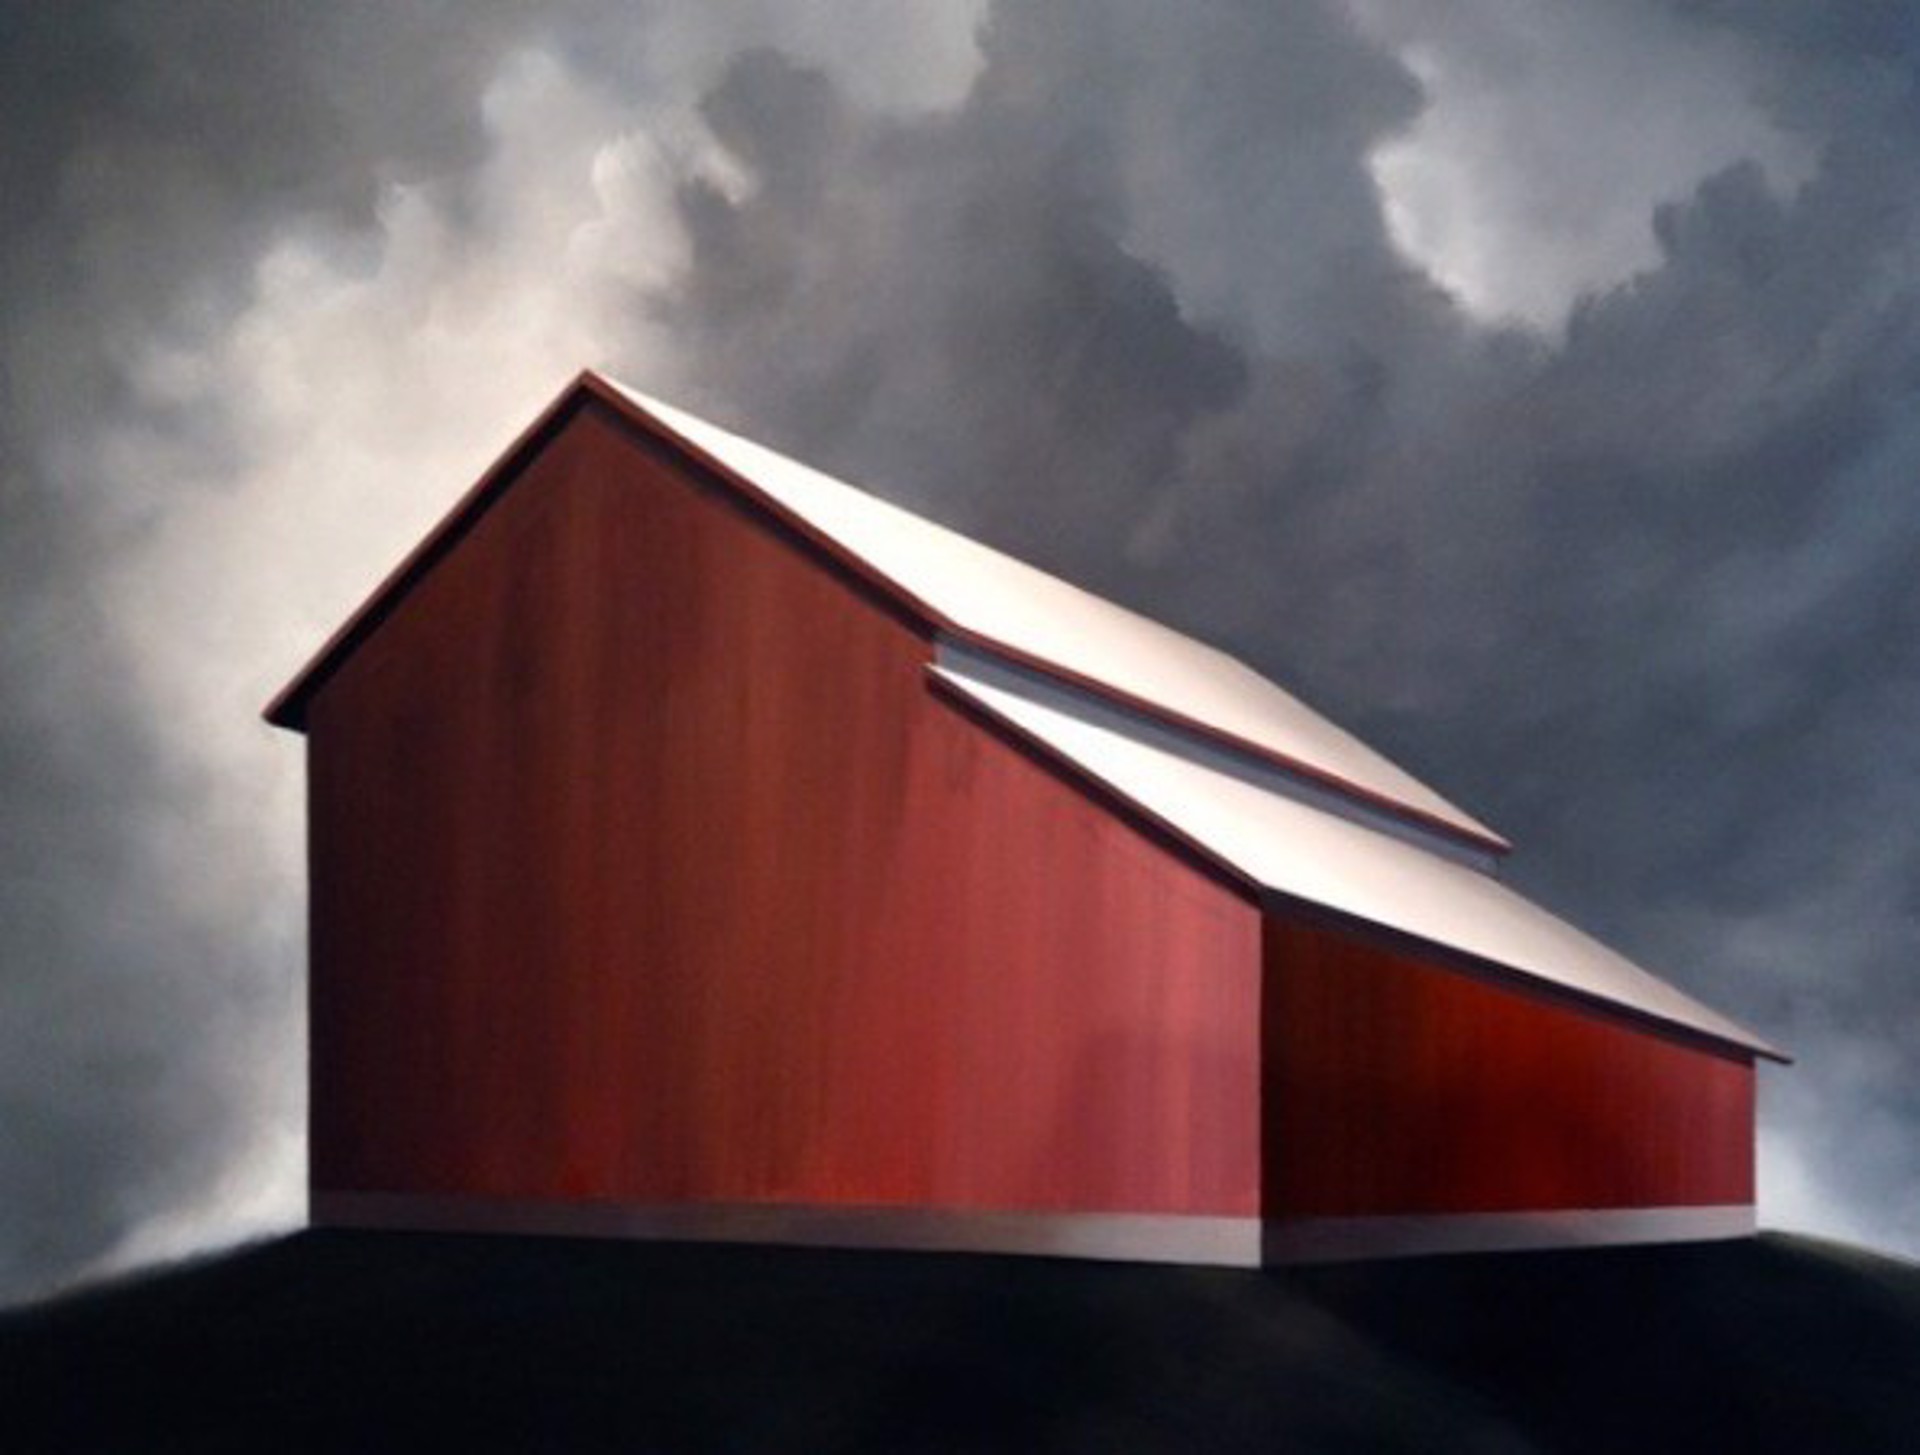 Red Barn / Gray Skies by Louis Copt